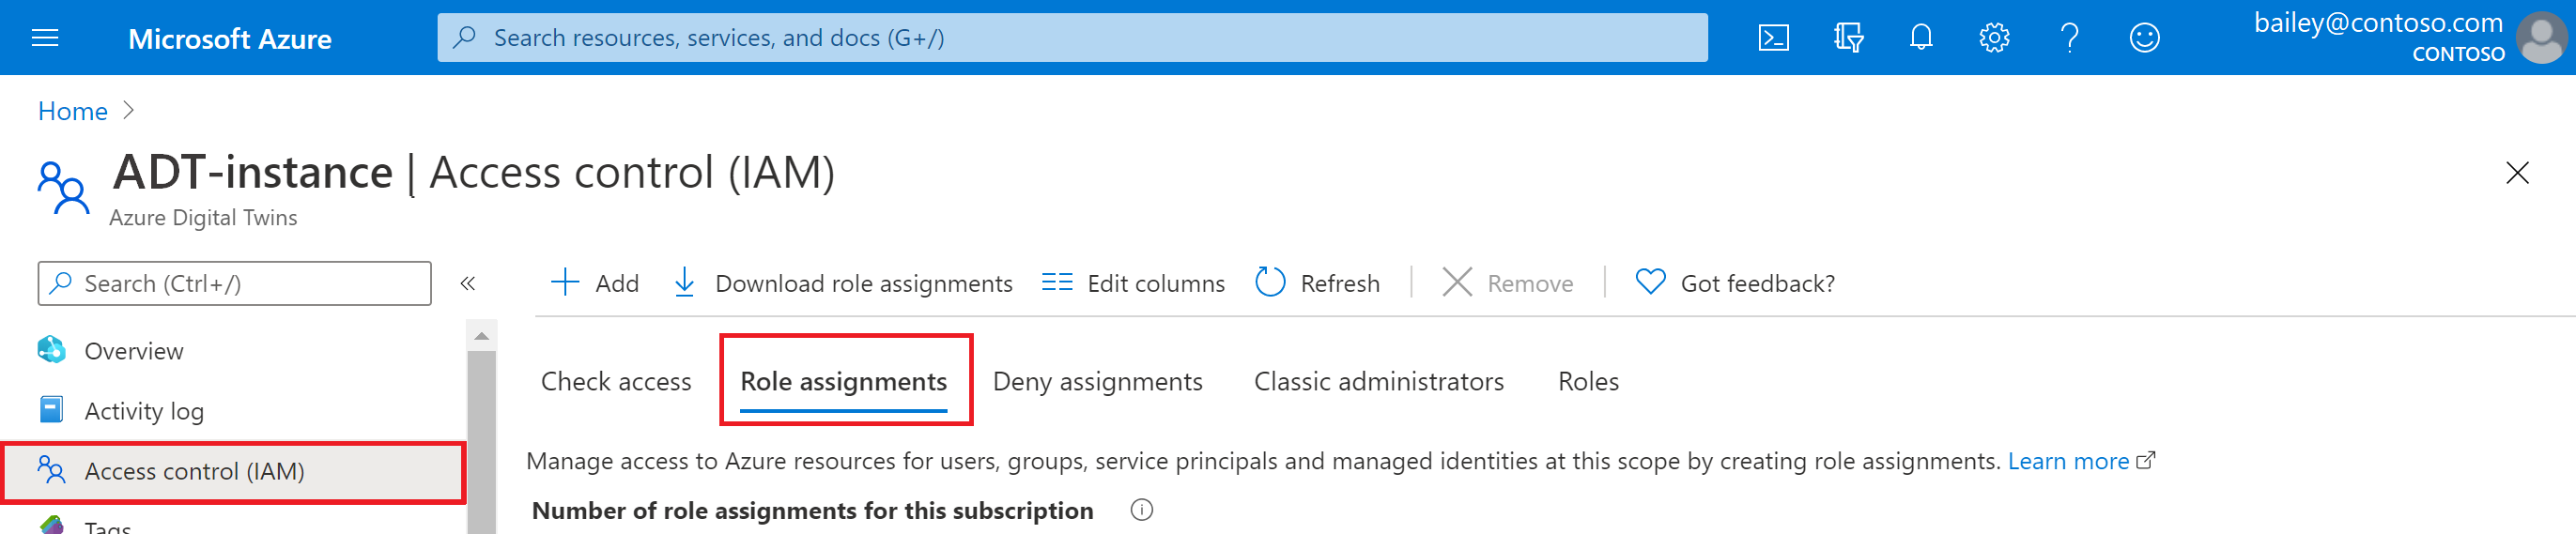 Screenshot of the Role Assignments page for an Azure Digital Twins instance in the Azure portal.